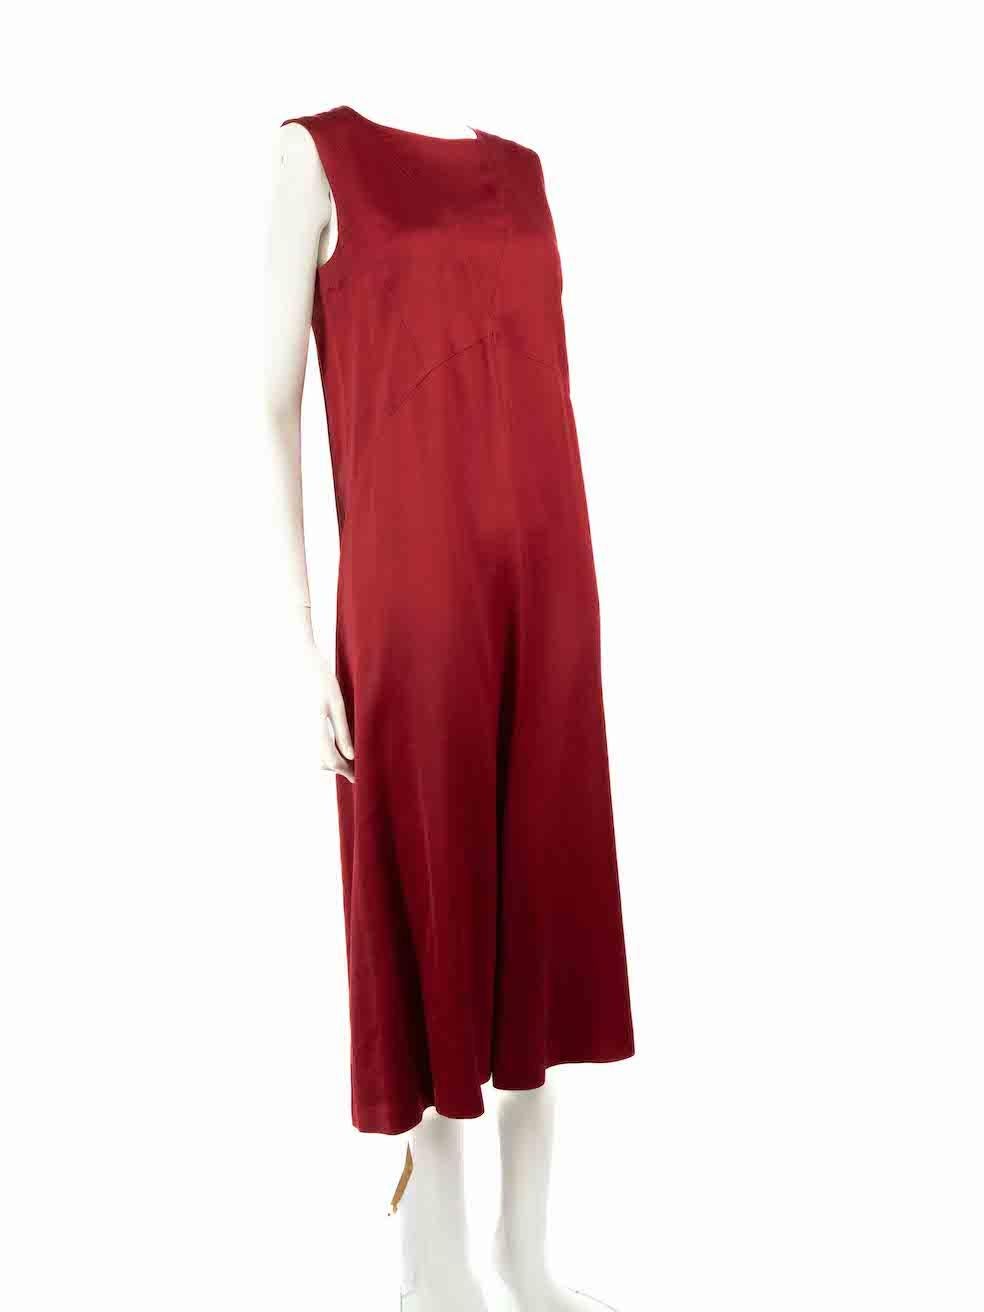 CONDITION is Very good. Minimal wear to dress is evident. Minimal wear to internal lining with loose stitching near the top of the zip on this used 'S Max Mara designer resale item.
 
 
 
 Details
 
 
 Red
 
 Viscose
 
 Dress
 
 Sleeveless
 
 Midi
